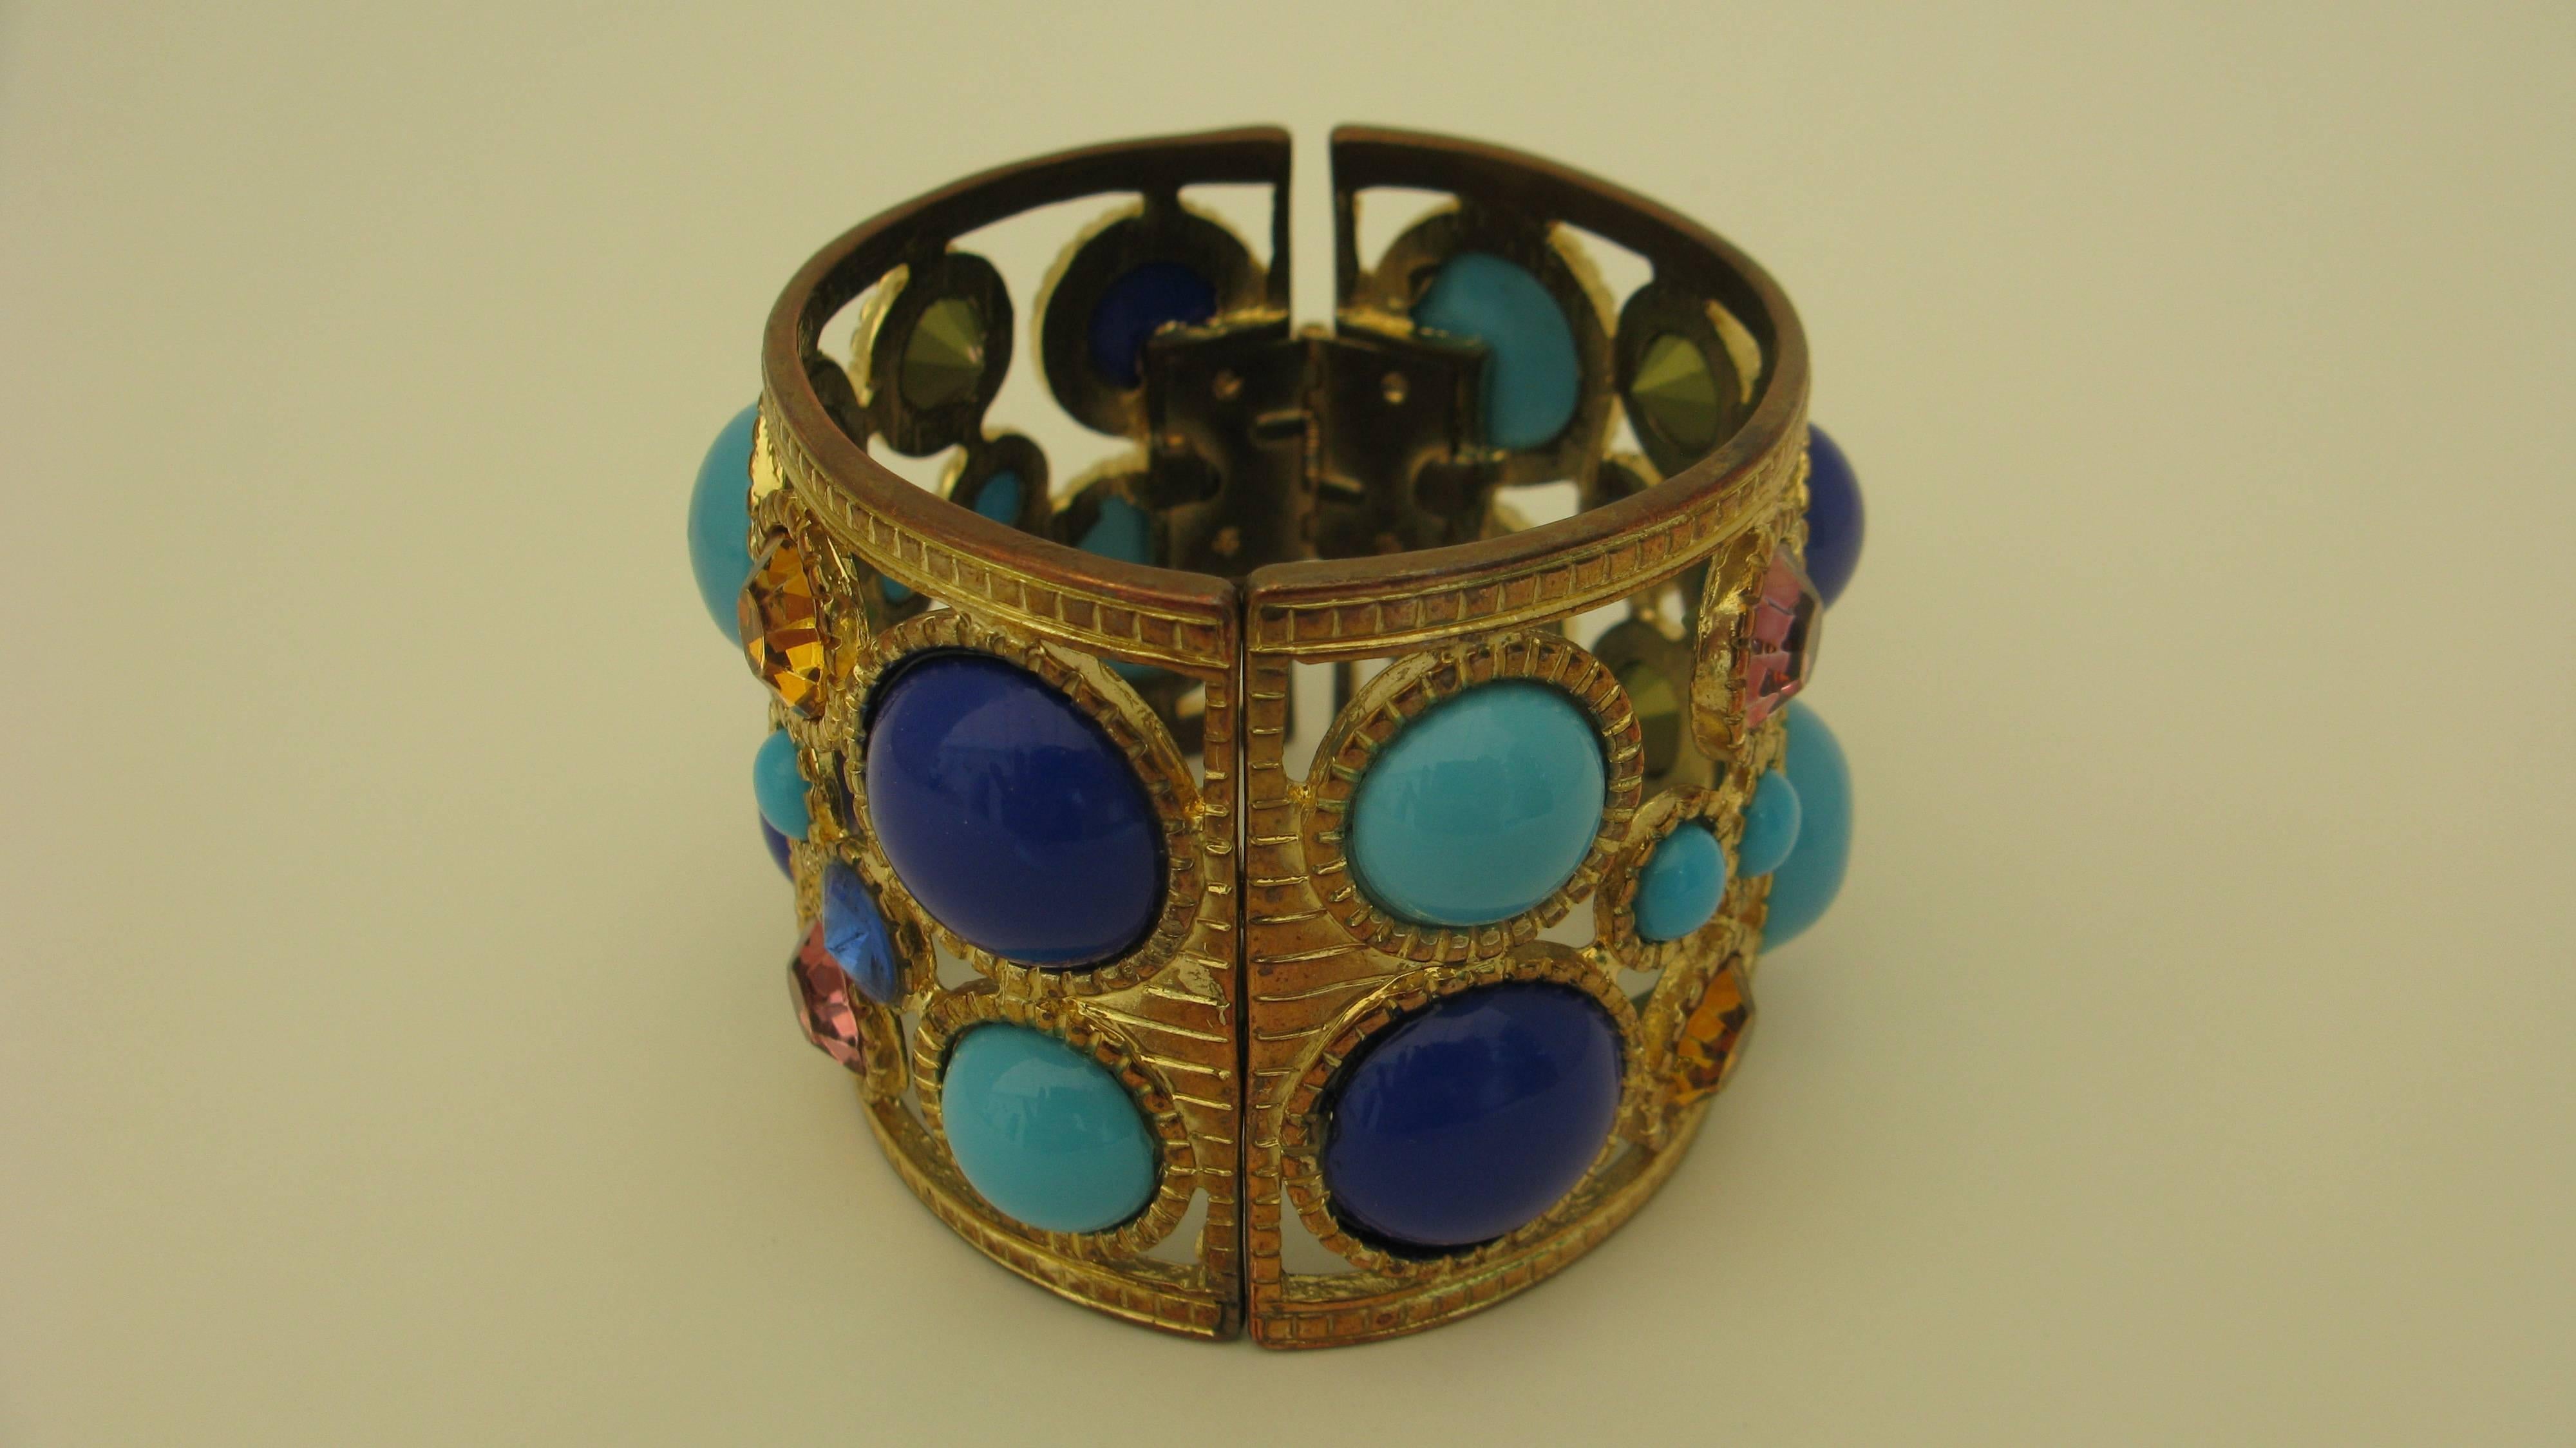 A beautiful KJL (marked) vintage bracelet--faux turquoise, cobalt, rose and gold crystals all around the surface in a gold plate bezel setting--hinged with magnetic closure.

From the Edith Hale Harkness Estate.